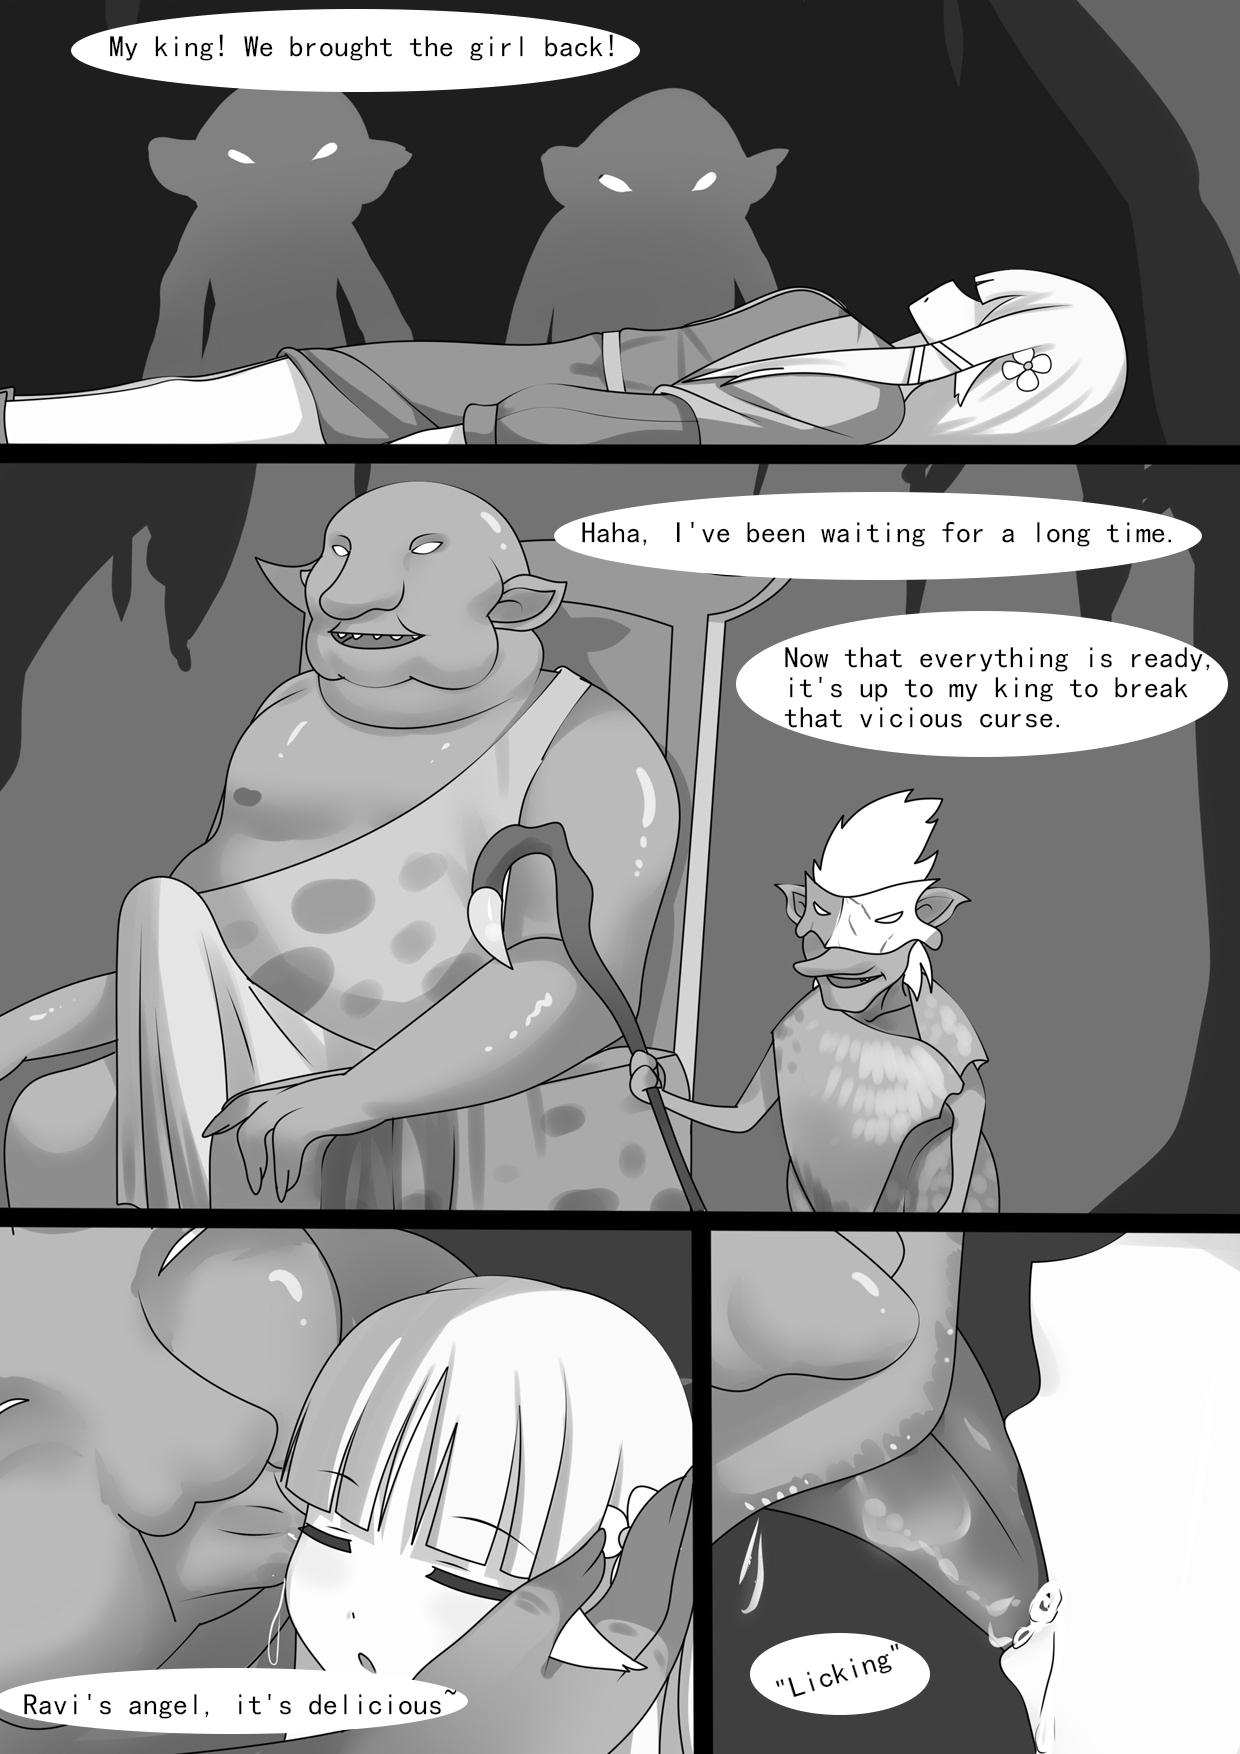 Smooth Counterattack of Orcs 1 - Original Plump - Page 7